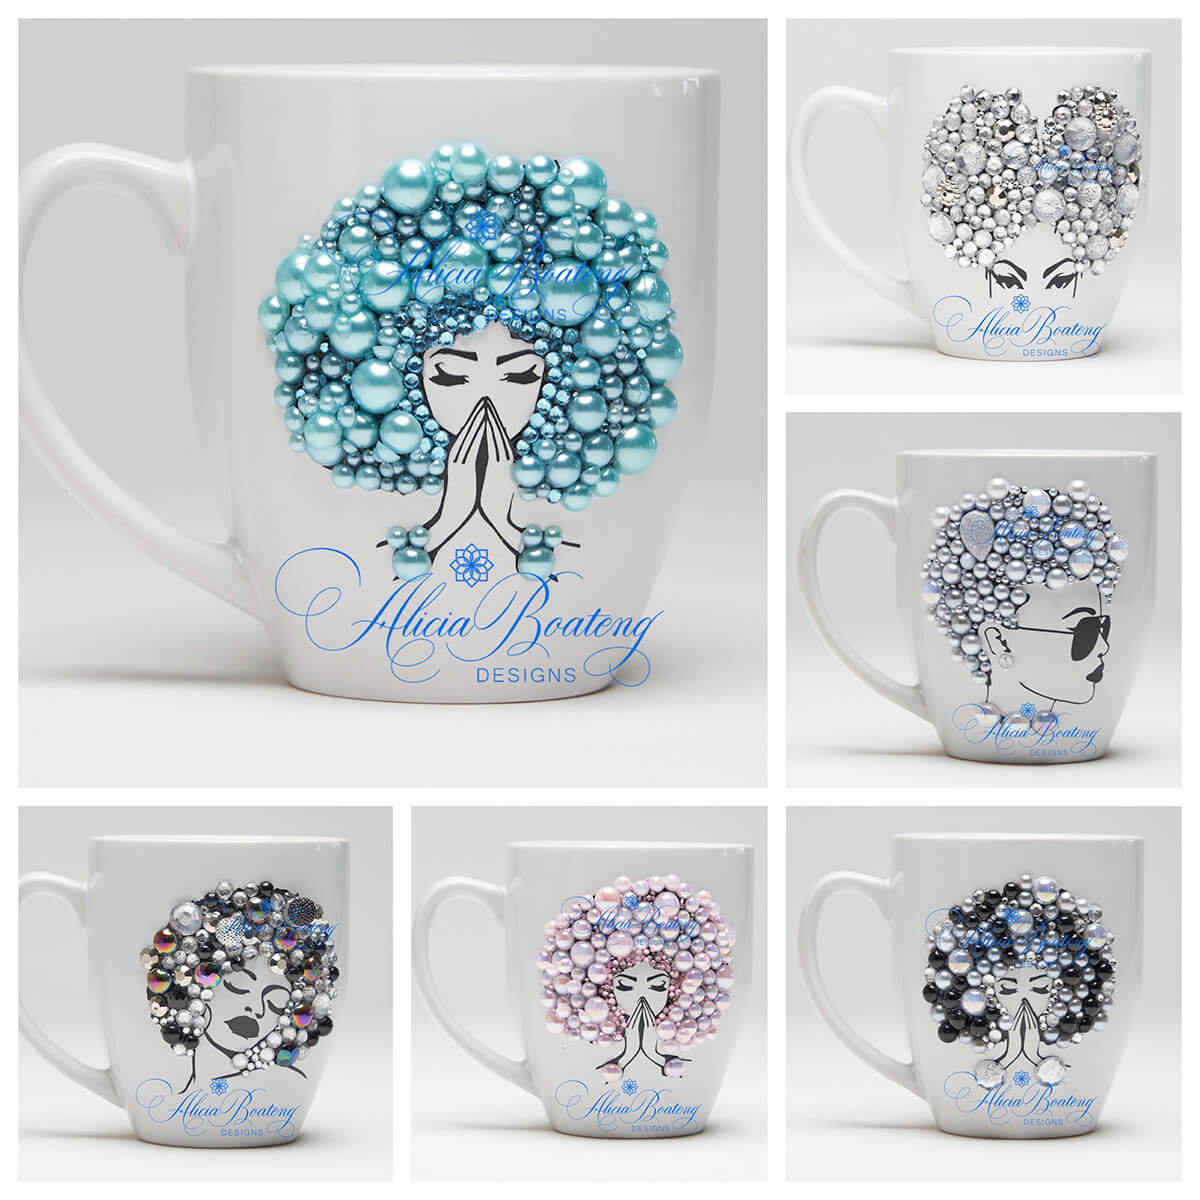 Photo shows 6 of Alicia Boateng Designs coffee mugs featuring influential BIPOC women accentuated by gems and beads. 